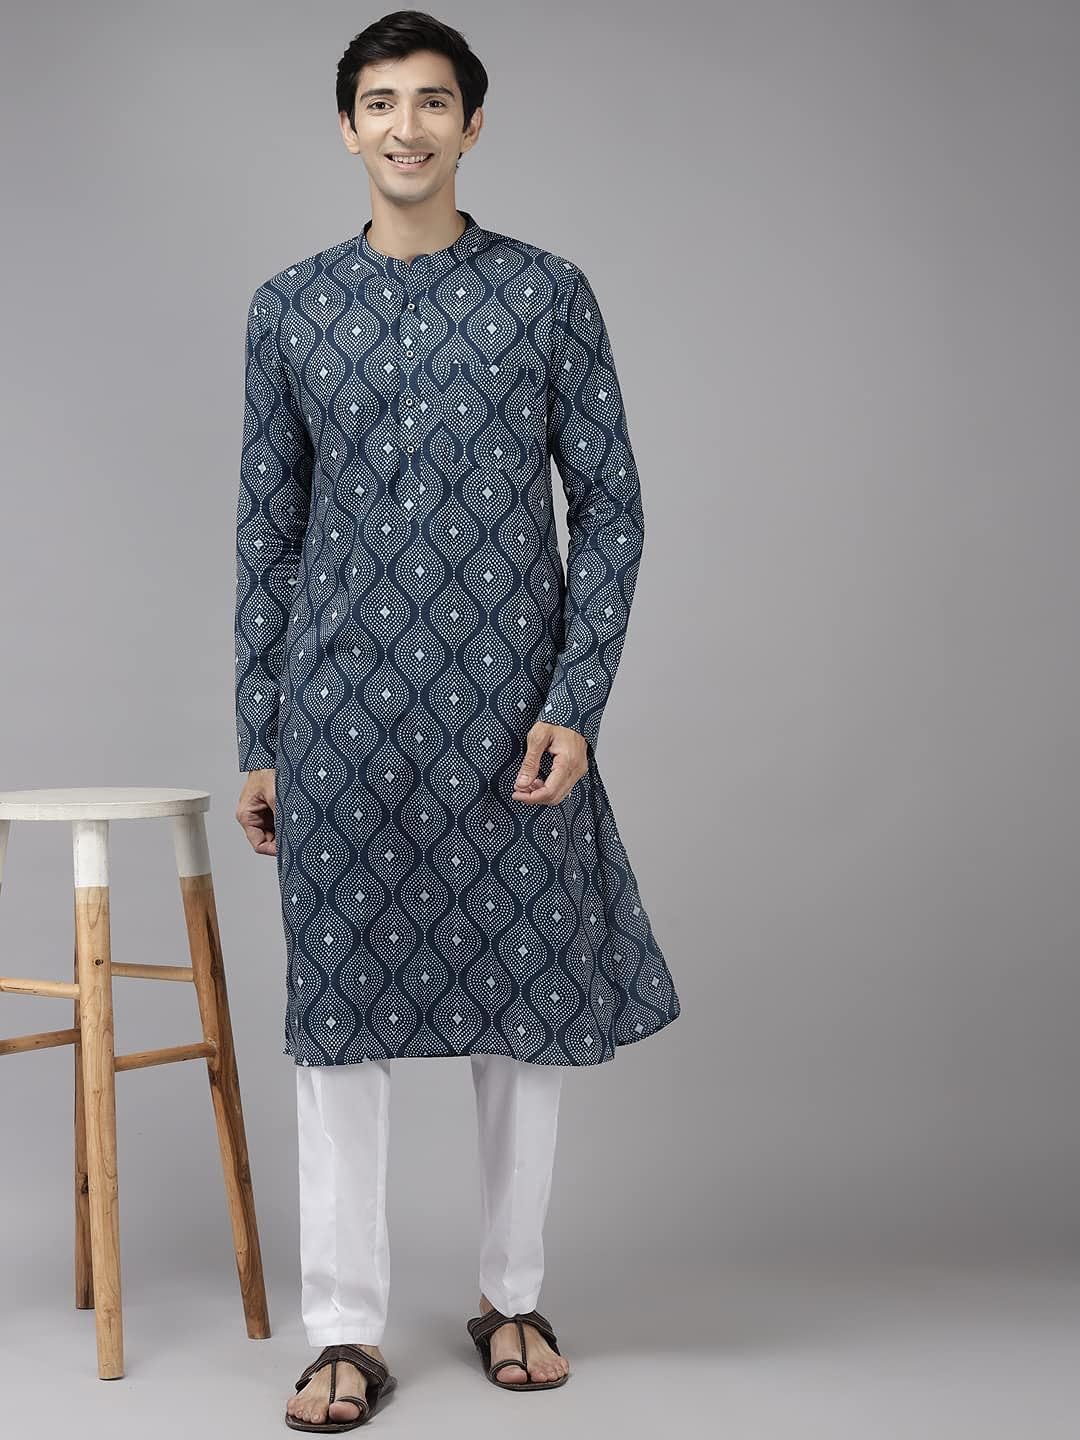 This 100% cotton regular kurta for men is crafted with a timeless style.